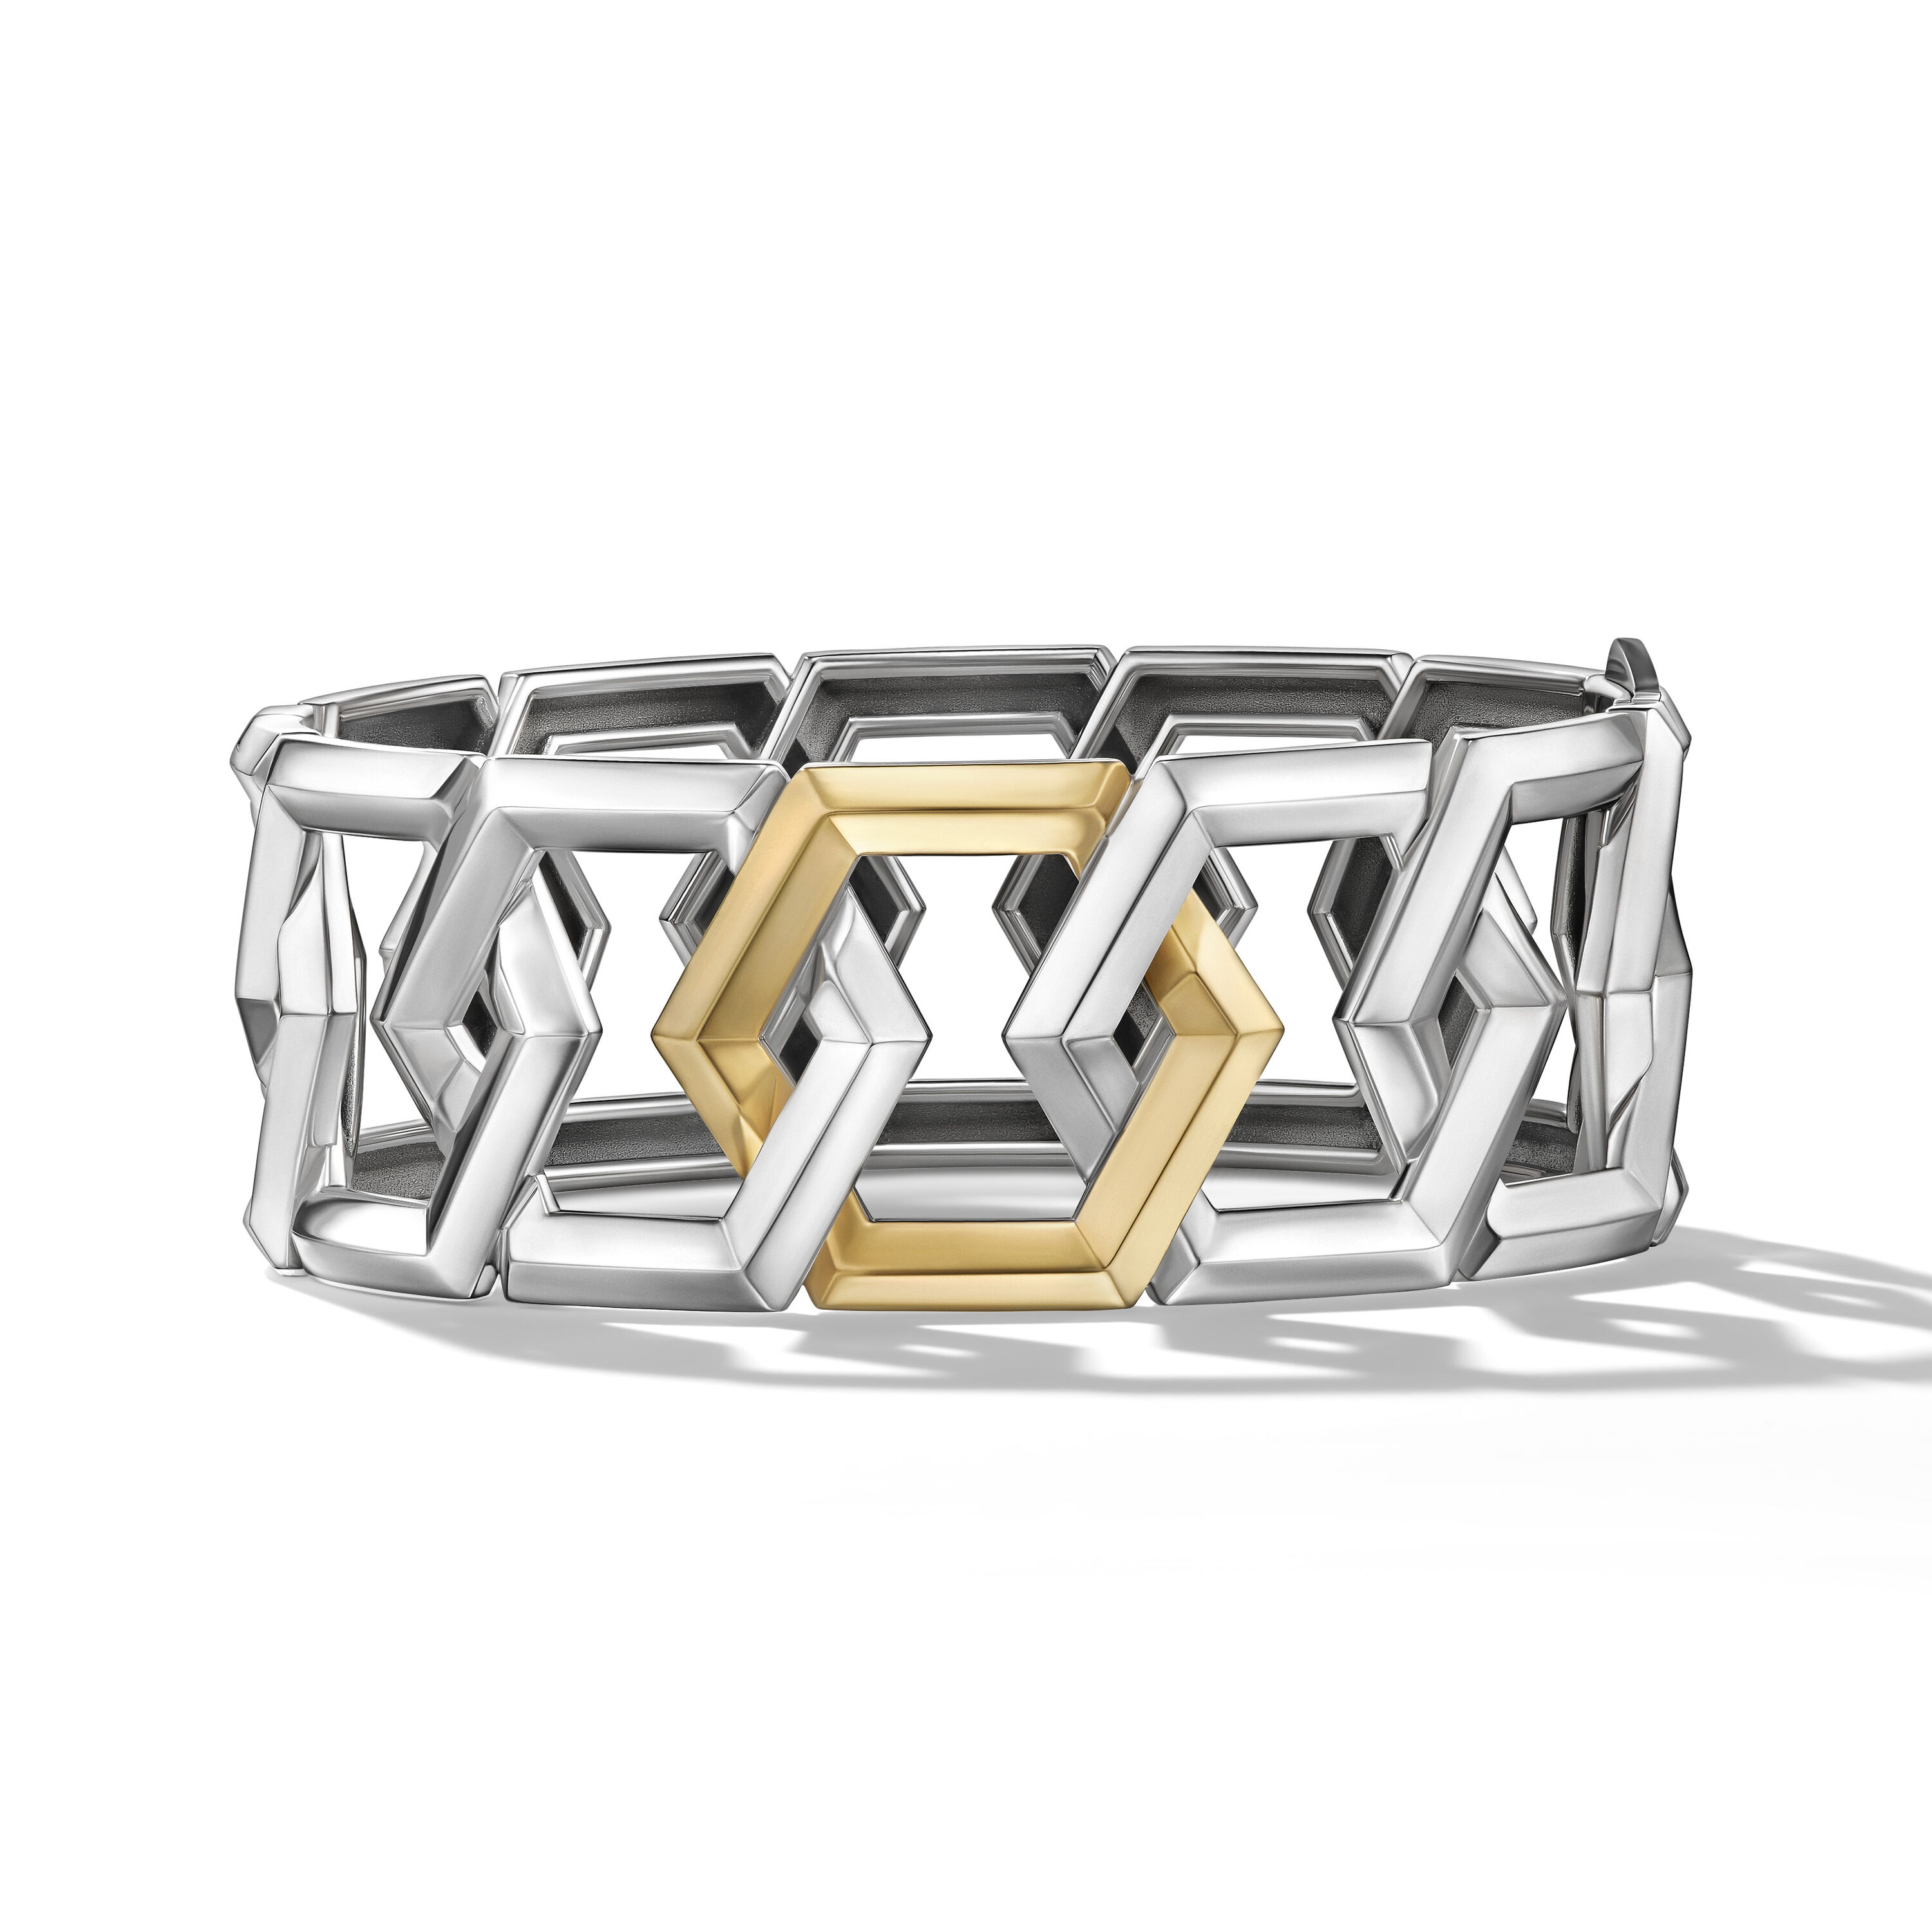 Carlyle™ Bracelet in Sterling Silver with 18K Yellow Gold, 24mm